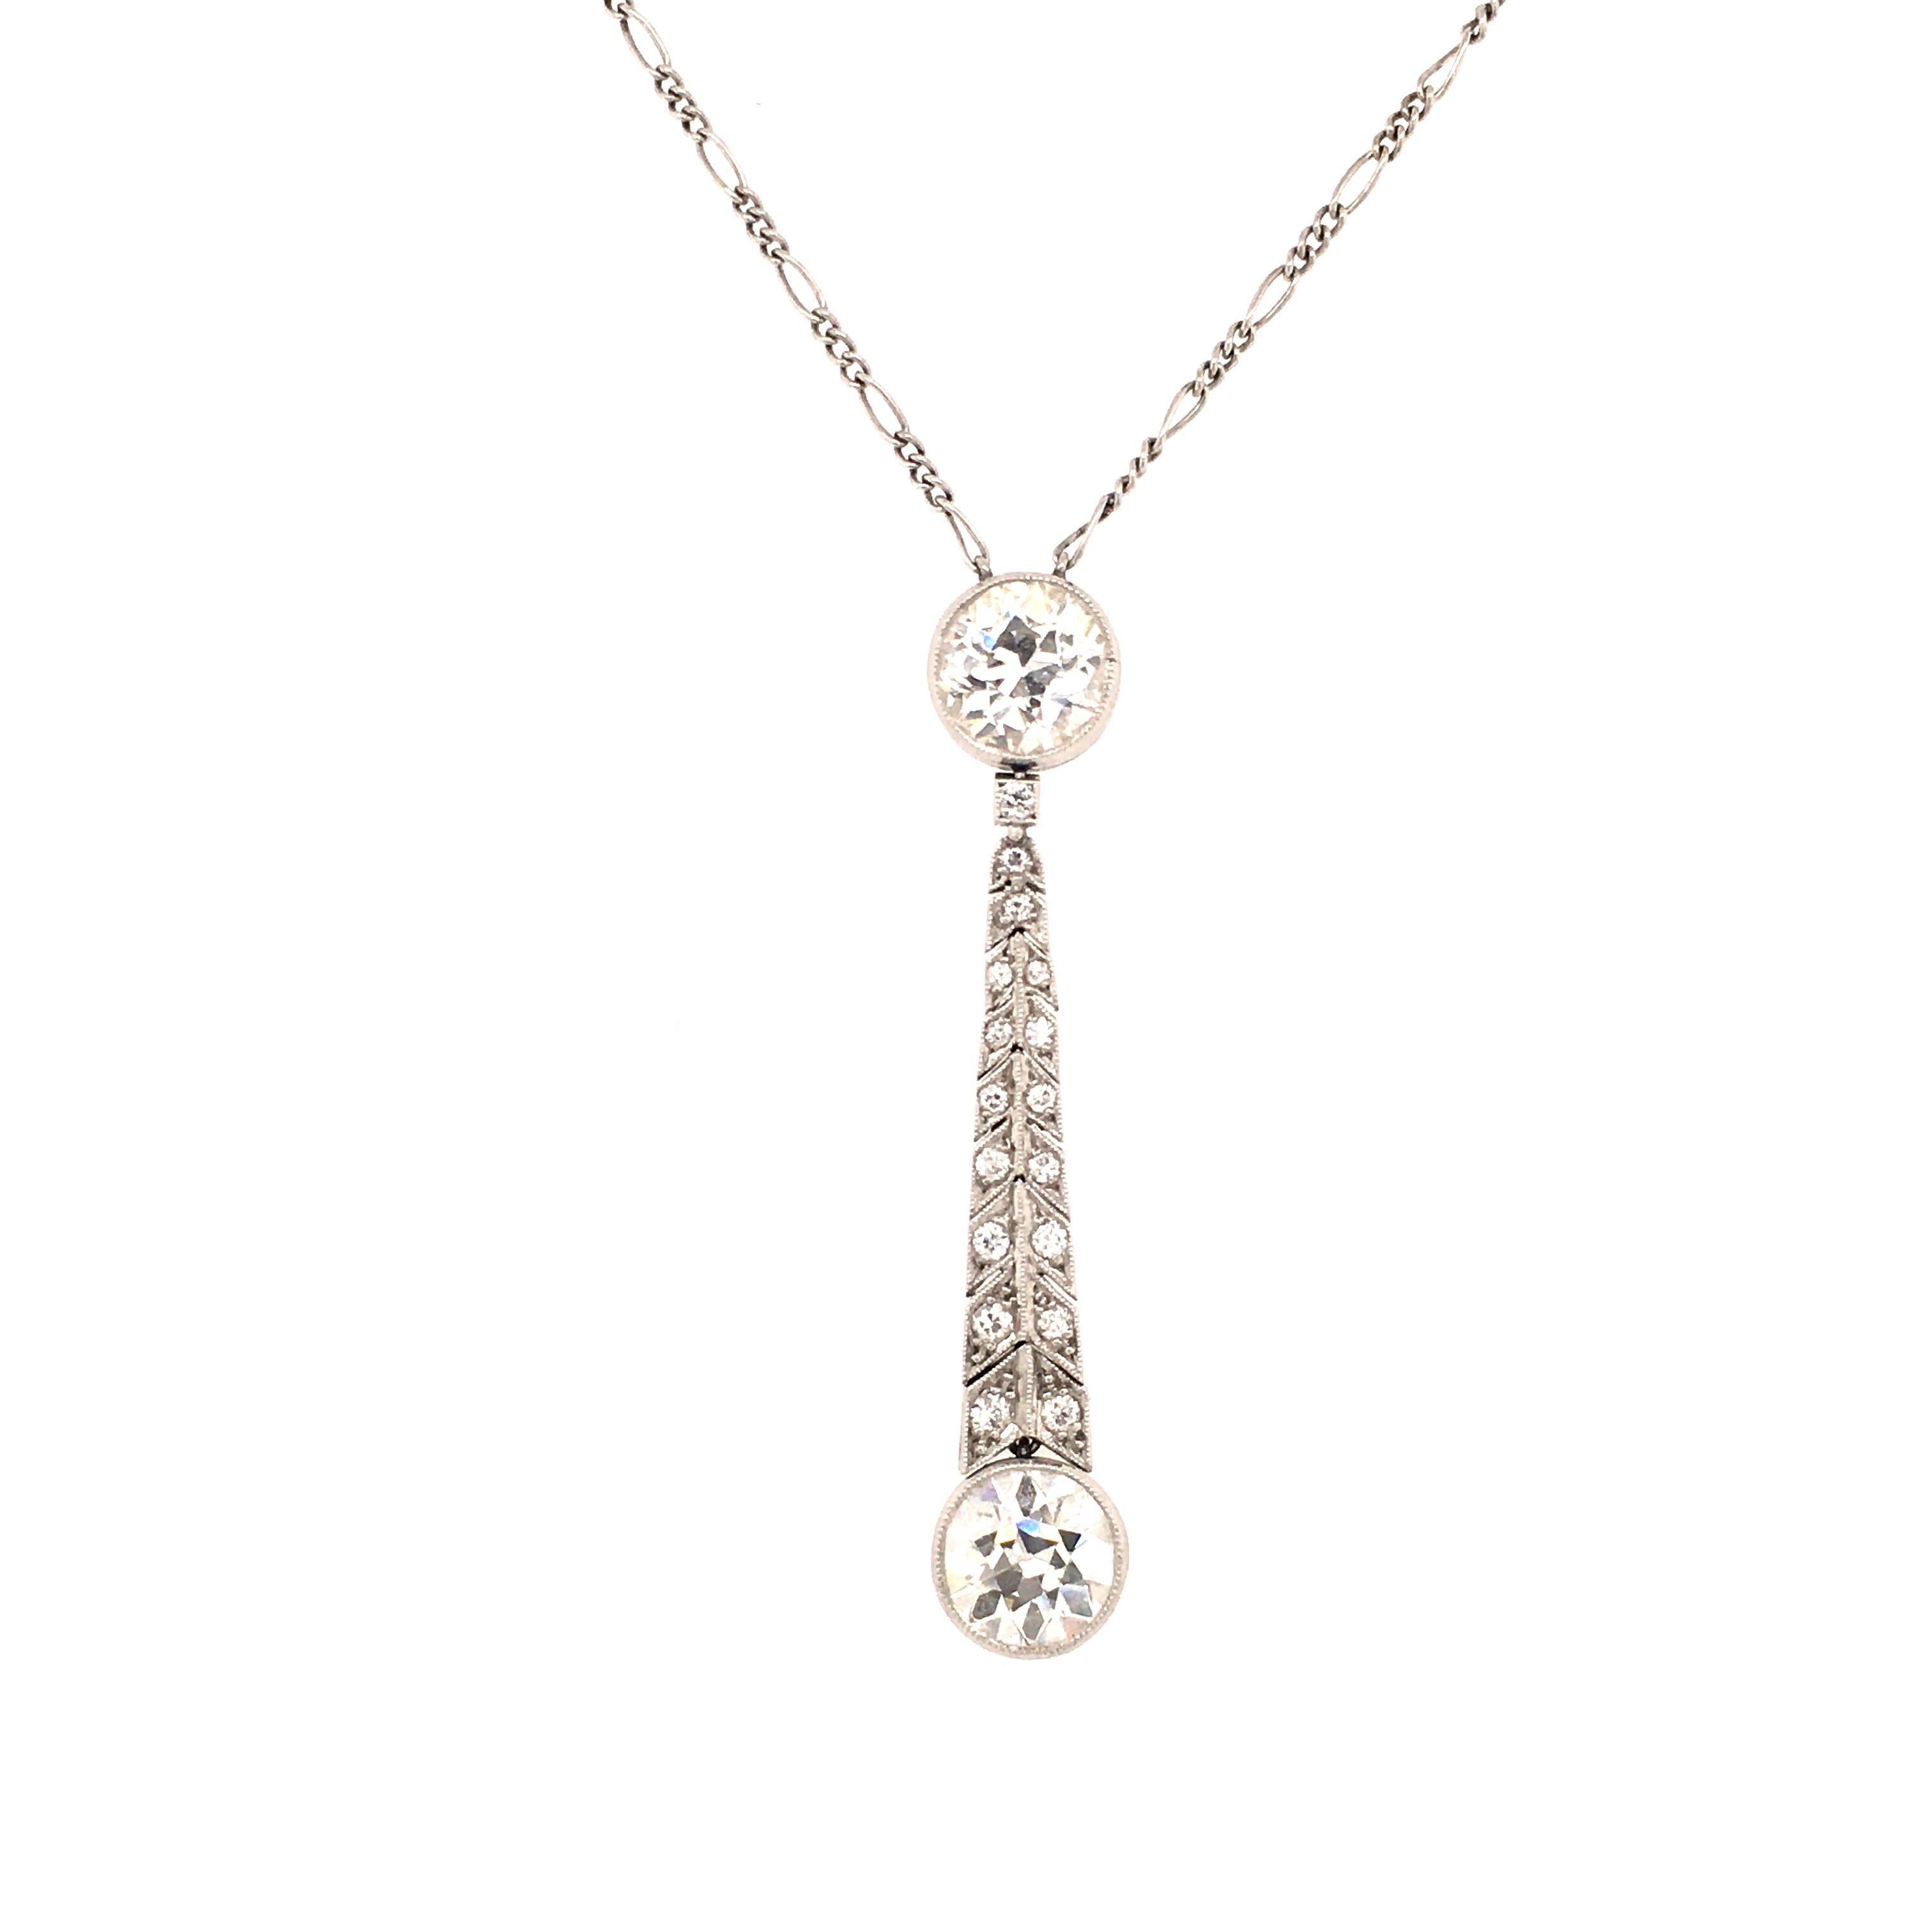 Beautiful Art Deco necklace made in platinum set with two old European cut diamonds of 1.23 ct H/si2 and 1.14 ct I/vs2 in quality.
Flexible herringbone pattern carefully set with 17 old cut diamonds.
You noticed how enchanting the chain is